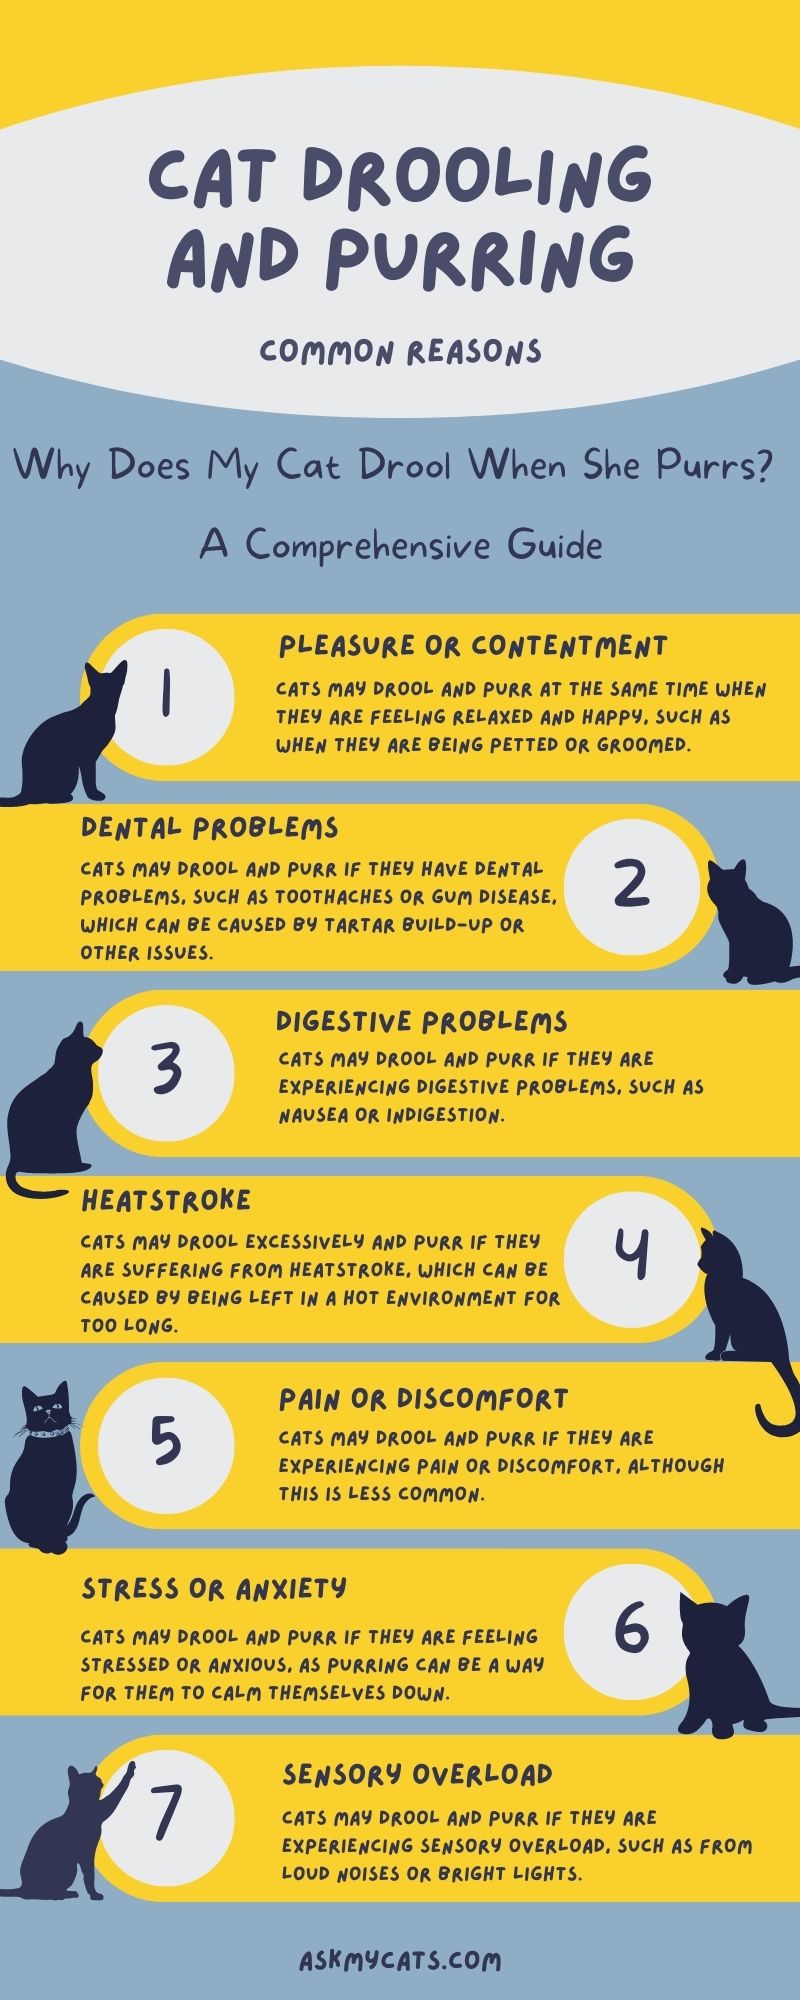 Why Does My Cat Drool When She Purrs? (Infographic)